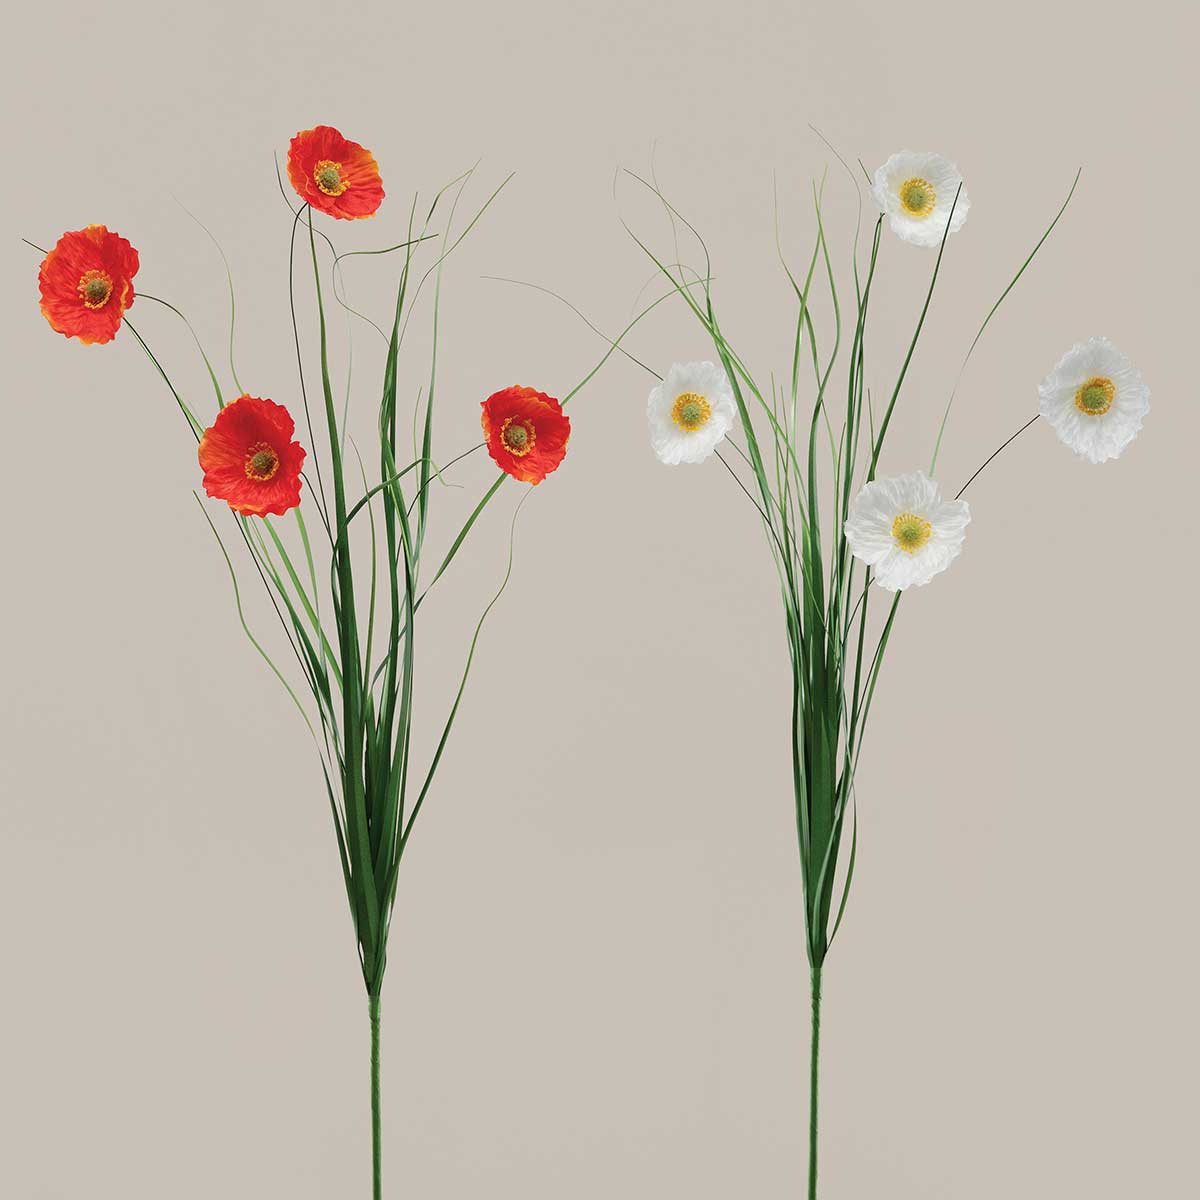 SPRAY POPPY/GRASS WHITE 6IN X 30IN POLYESTER/PLASTIC - Click Image to Close